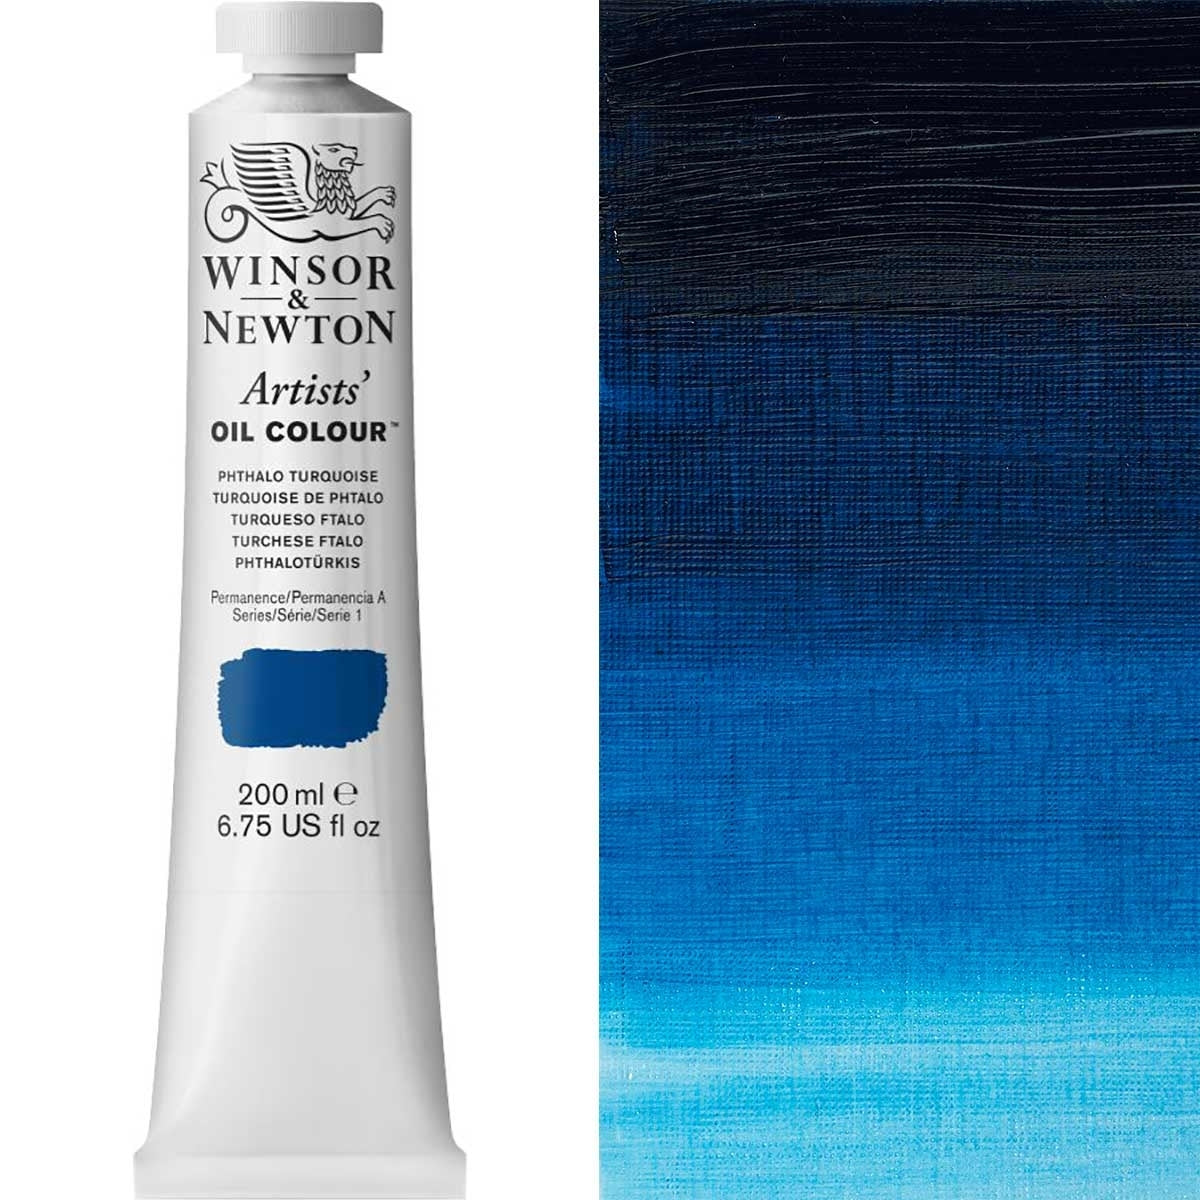 Winsor and Newton - Artists' Oil Colour - 200ml - Phthalo Turquoise